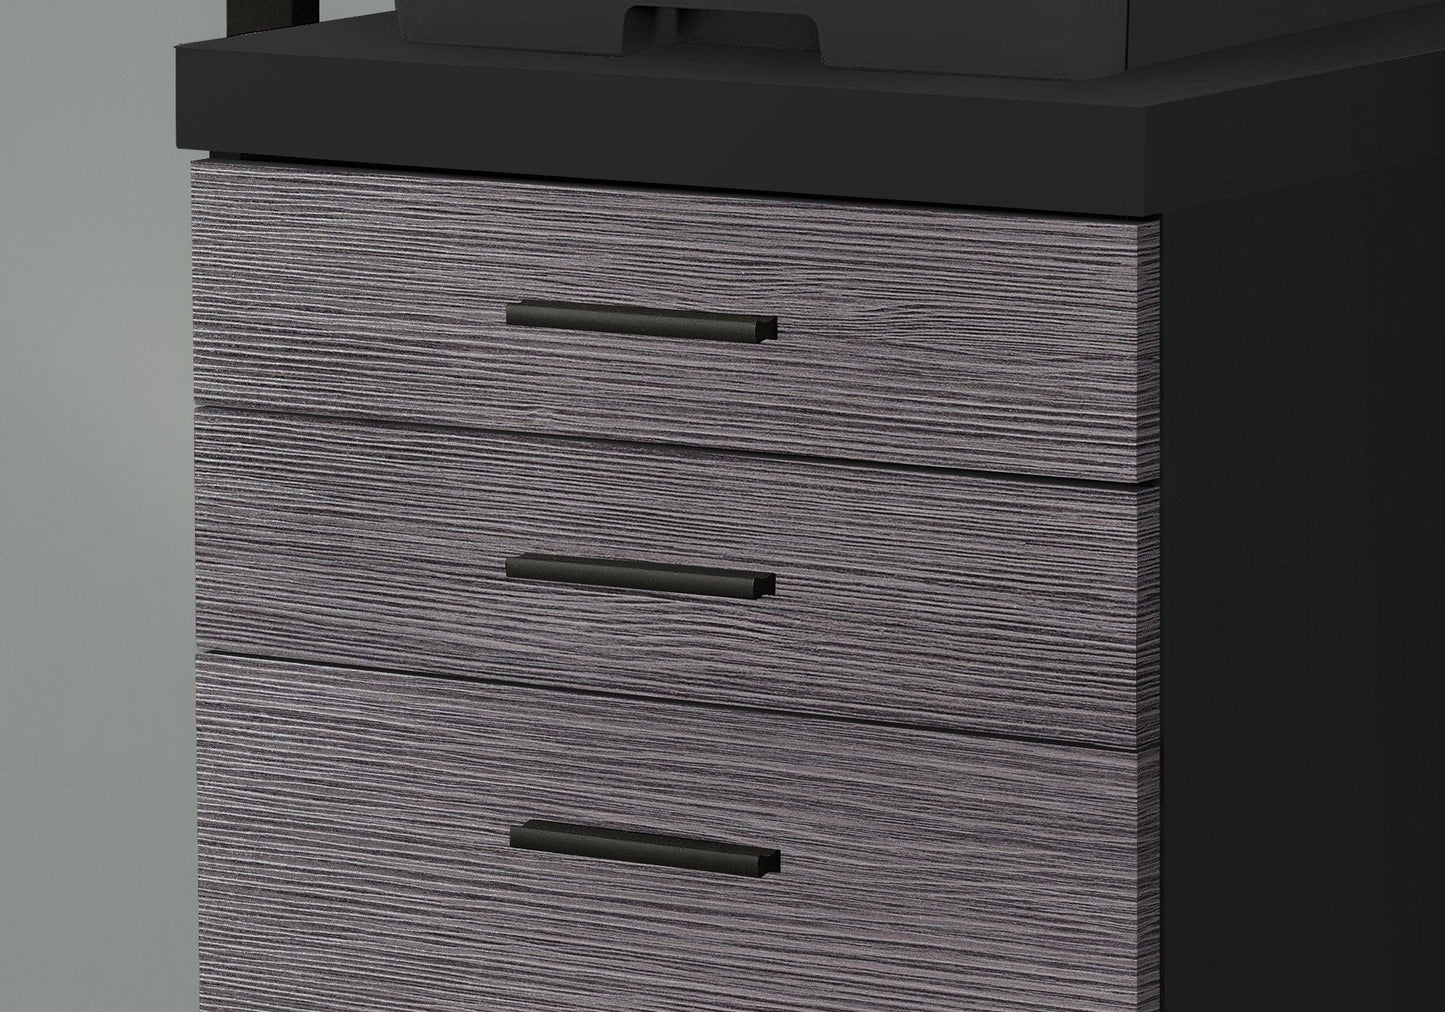 25.25" Particle Board And Mdf Filing Cabinet With 3 Drawers - FurniFindUSA